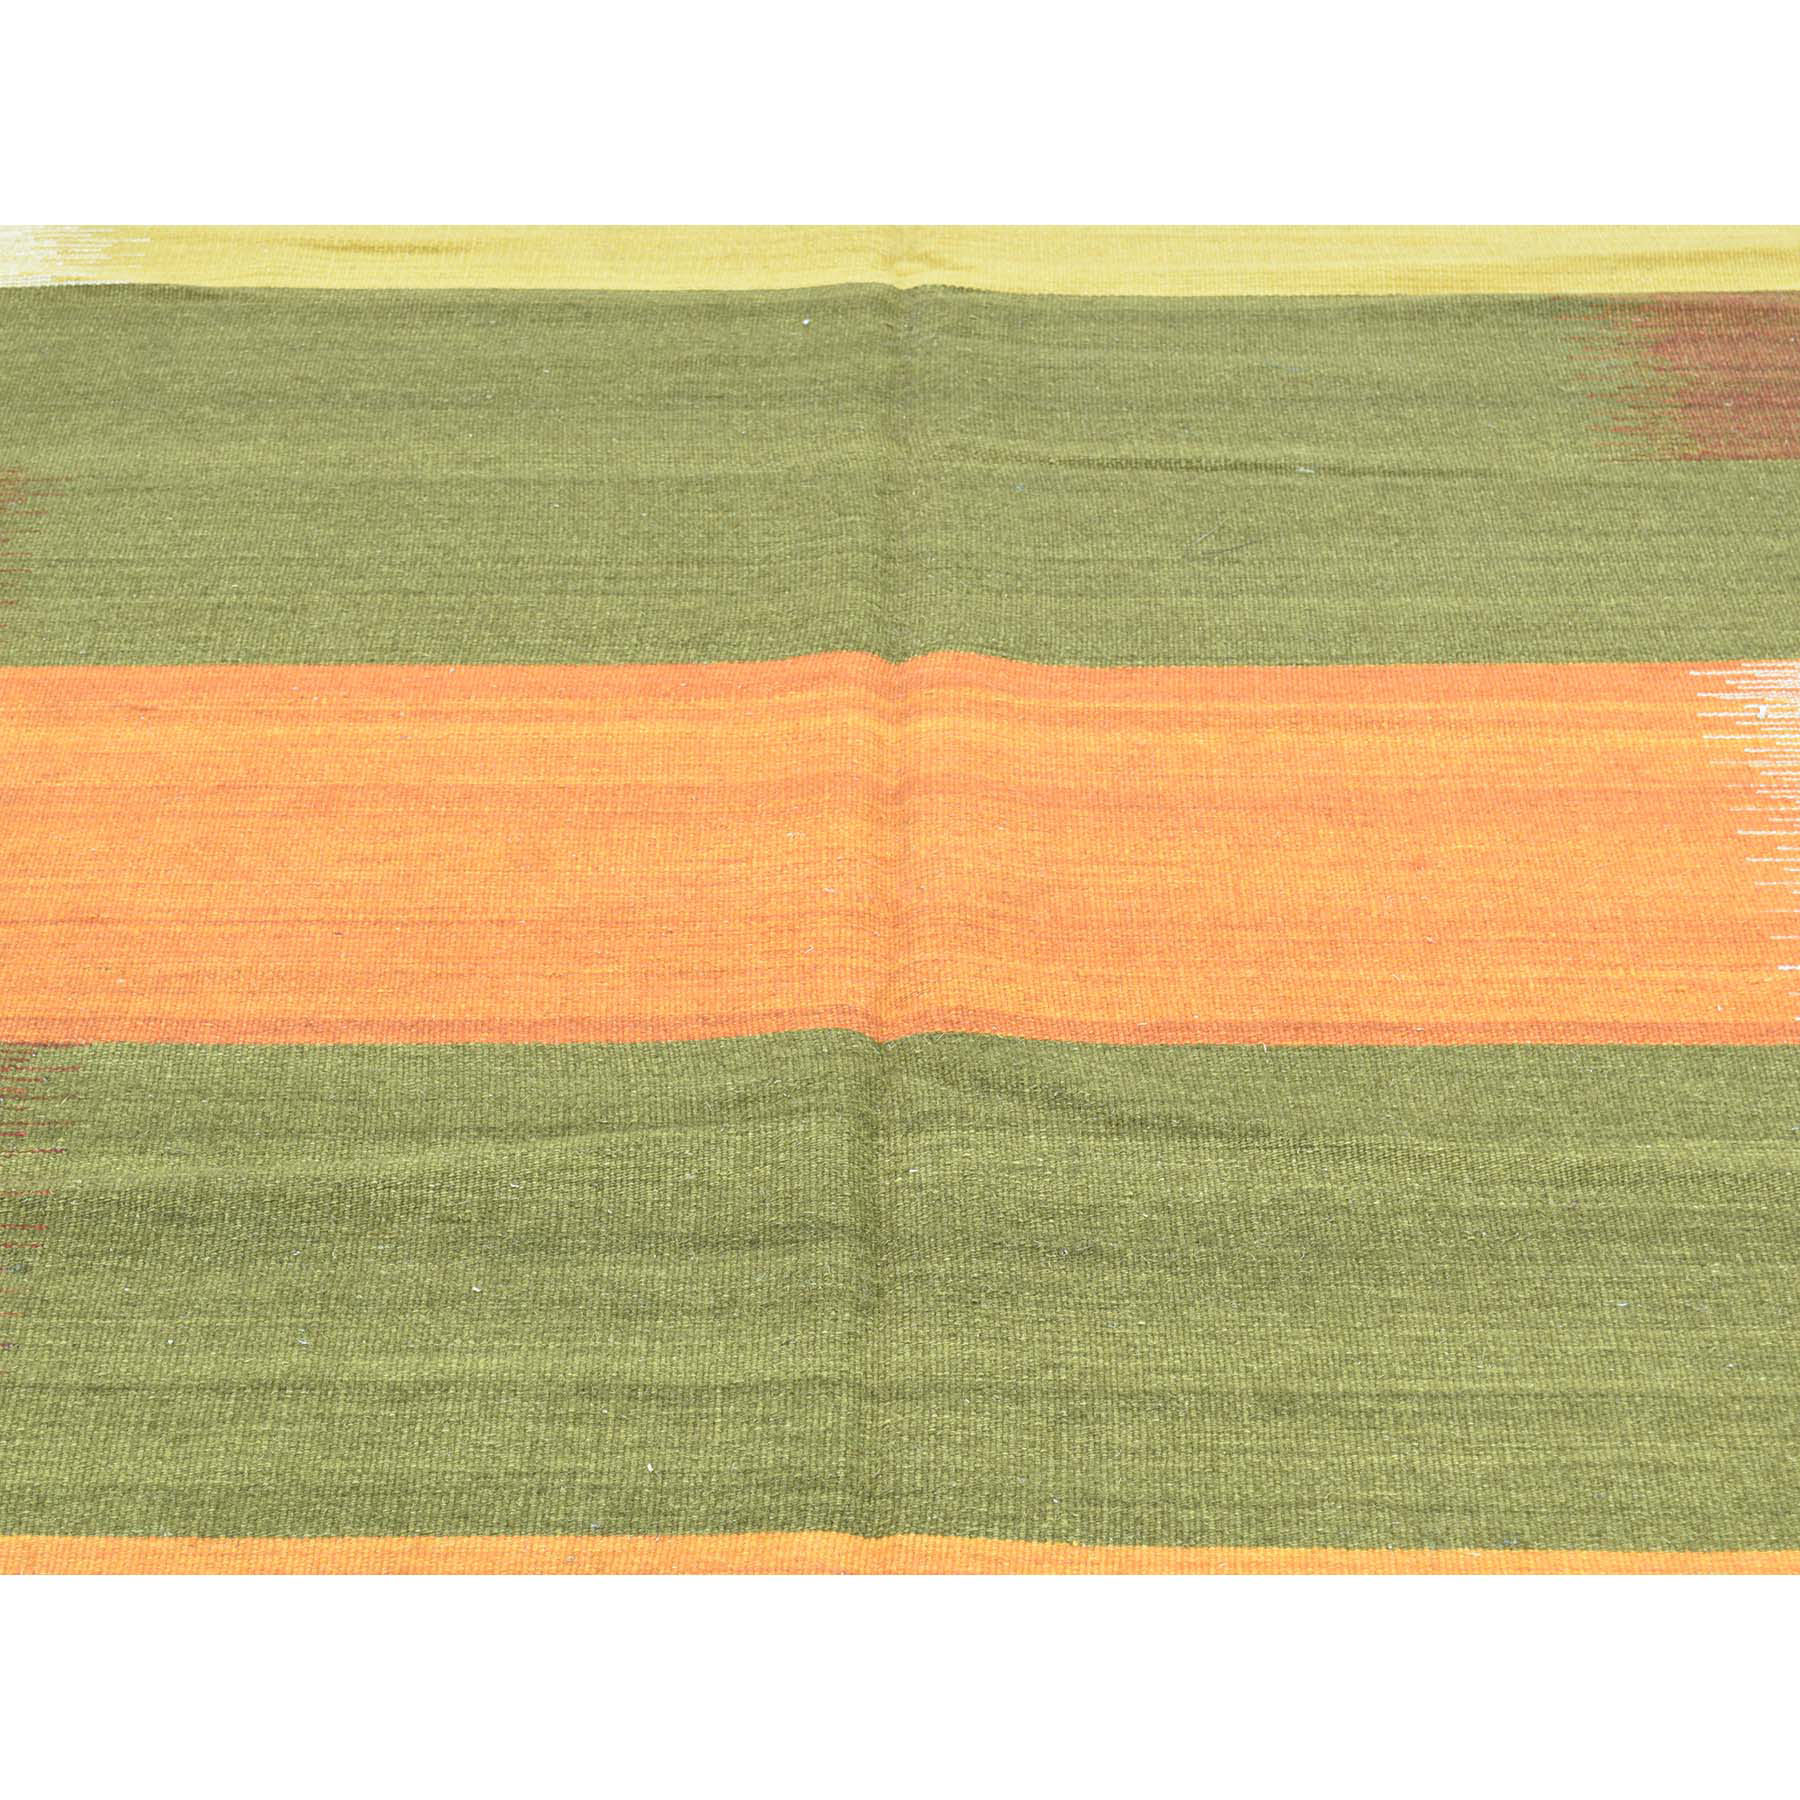 9'1"x12'6" Hand-Woven Durie Kilim Pure Wool Flat Weave Colorful Rug 